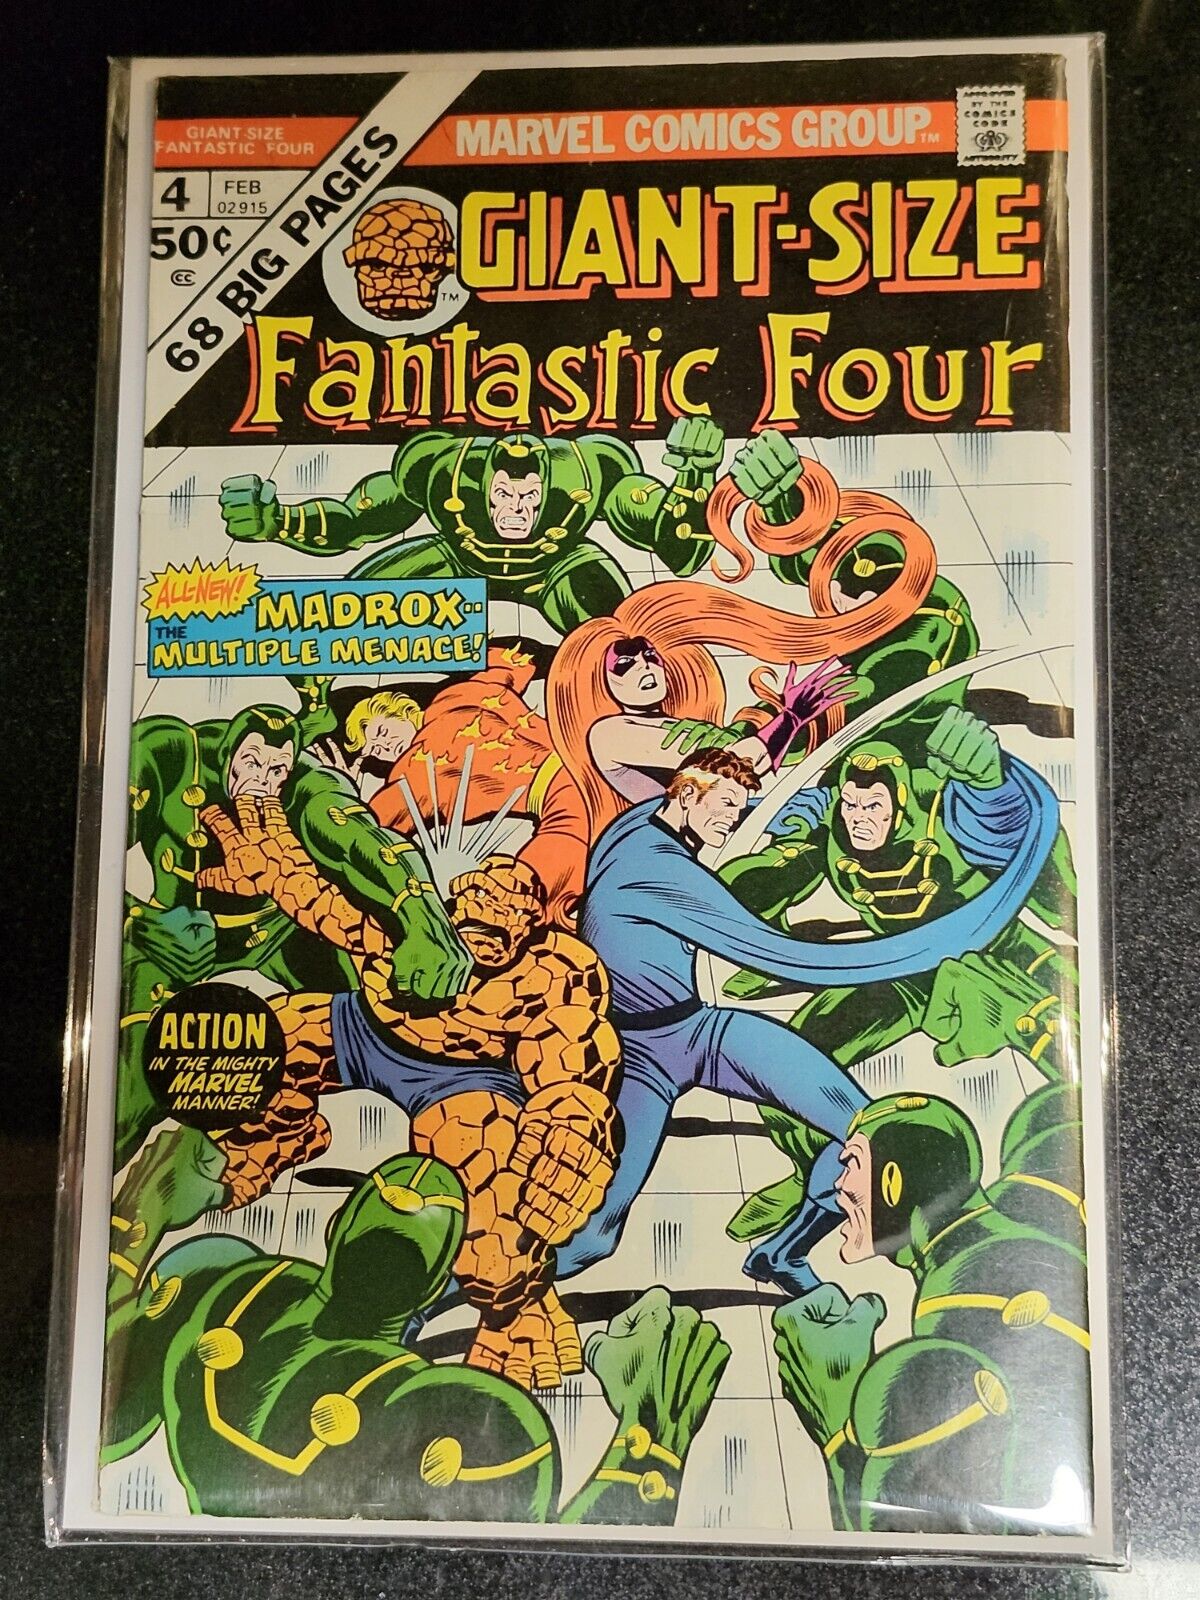 Giant-Size Fantastic Four #4 Very Fine+